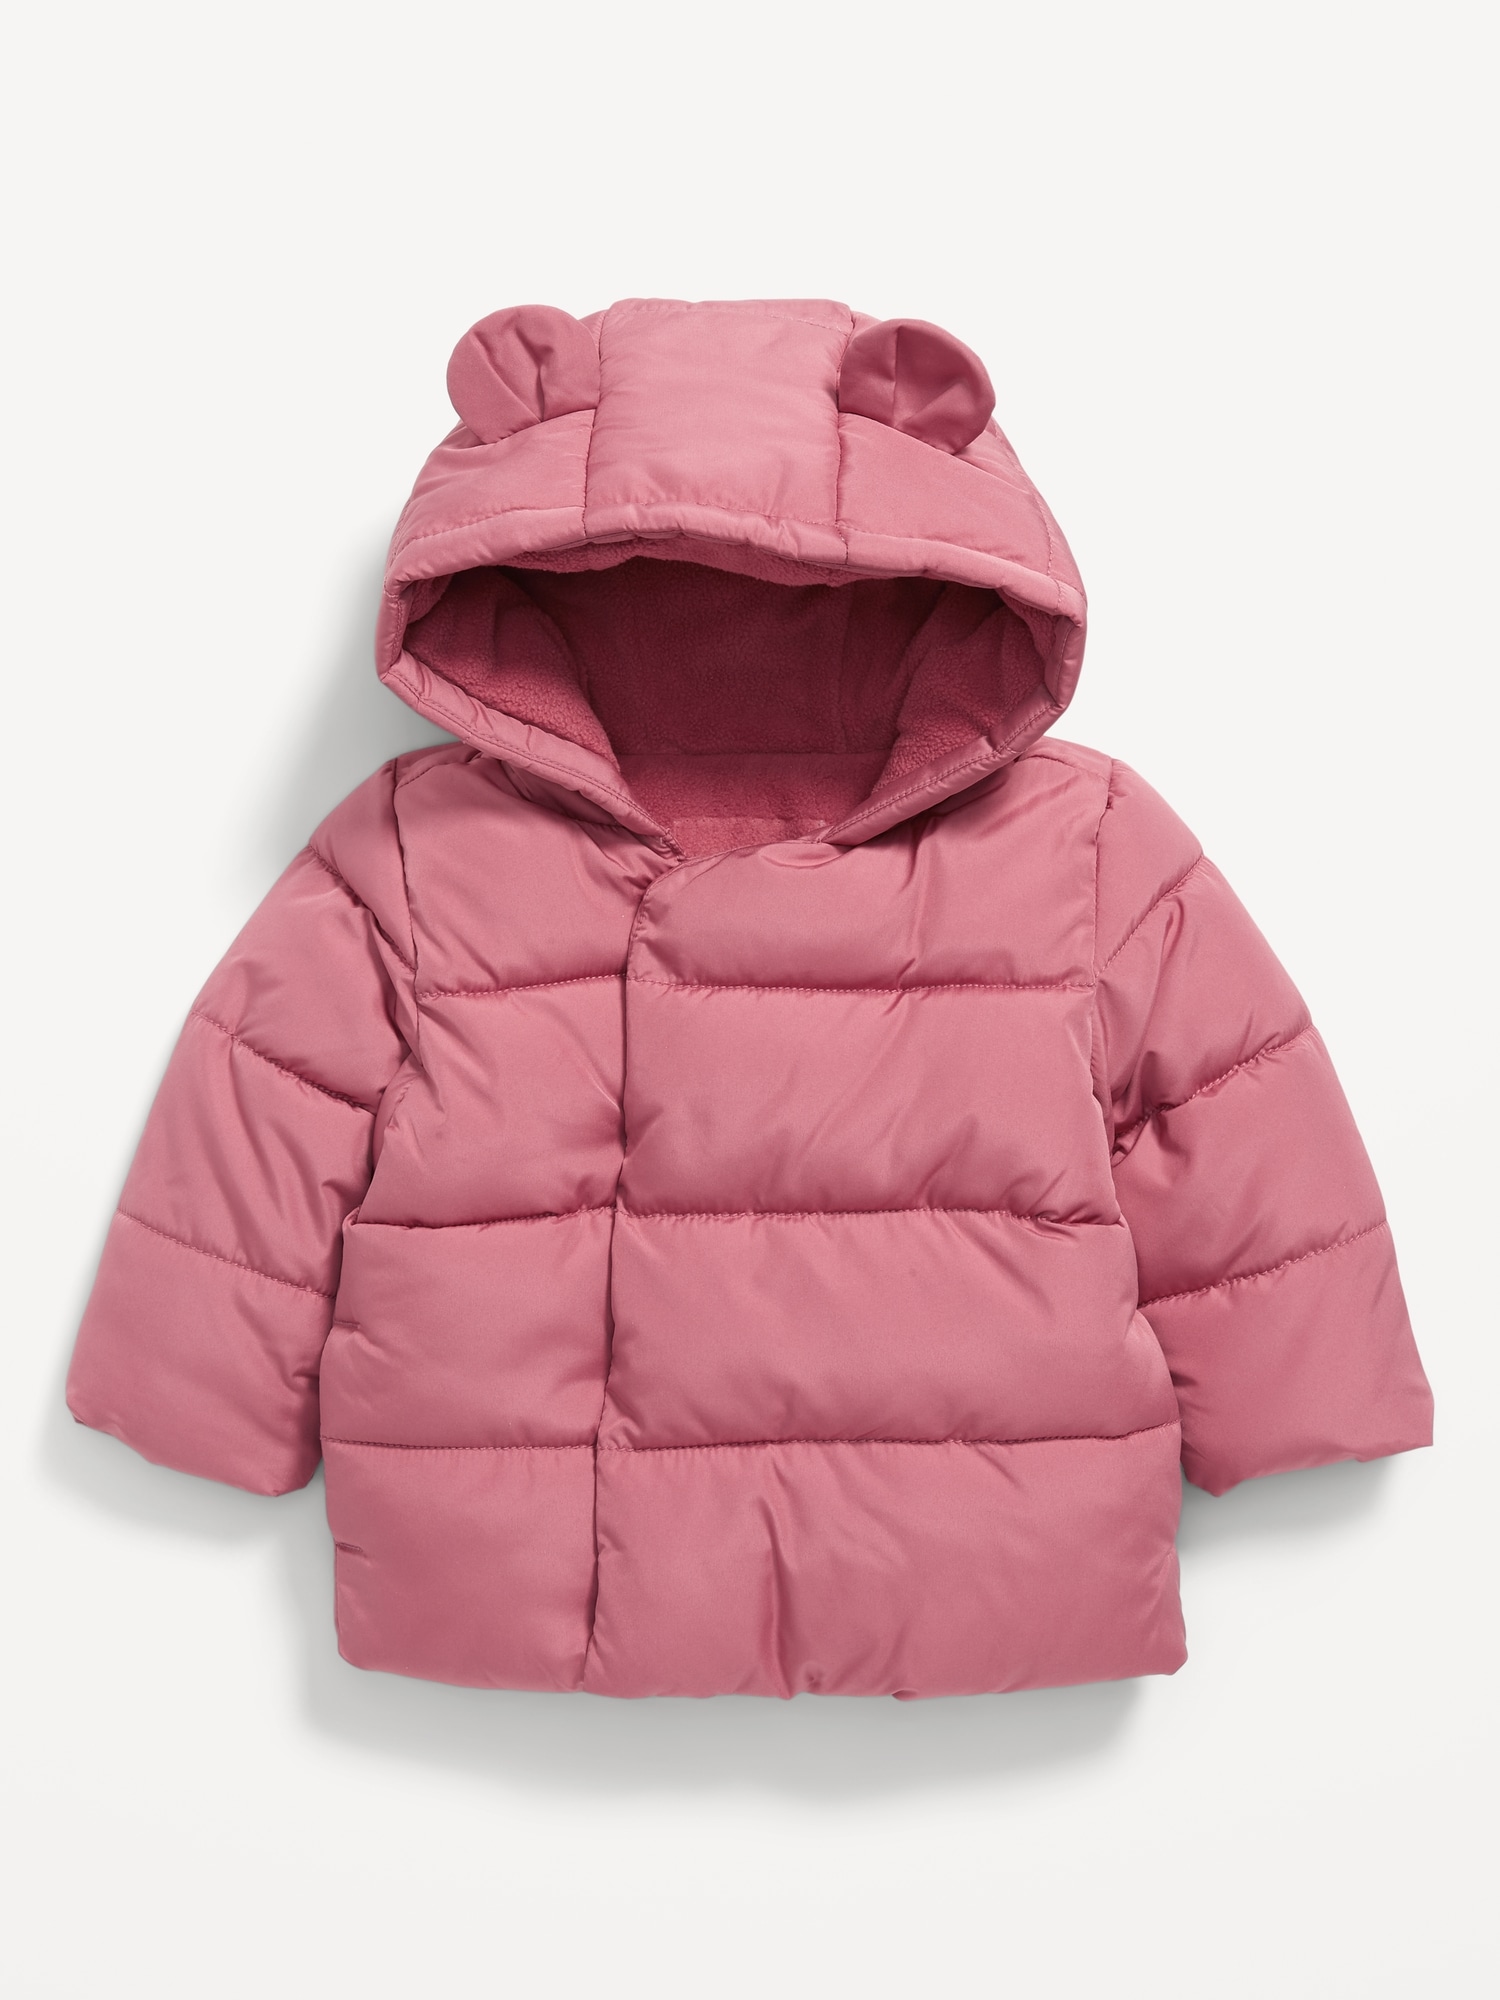 Unisex Hooded Frost-Free Puffer Jacket for Baby | Old Navy